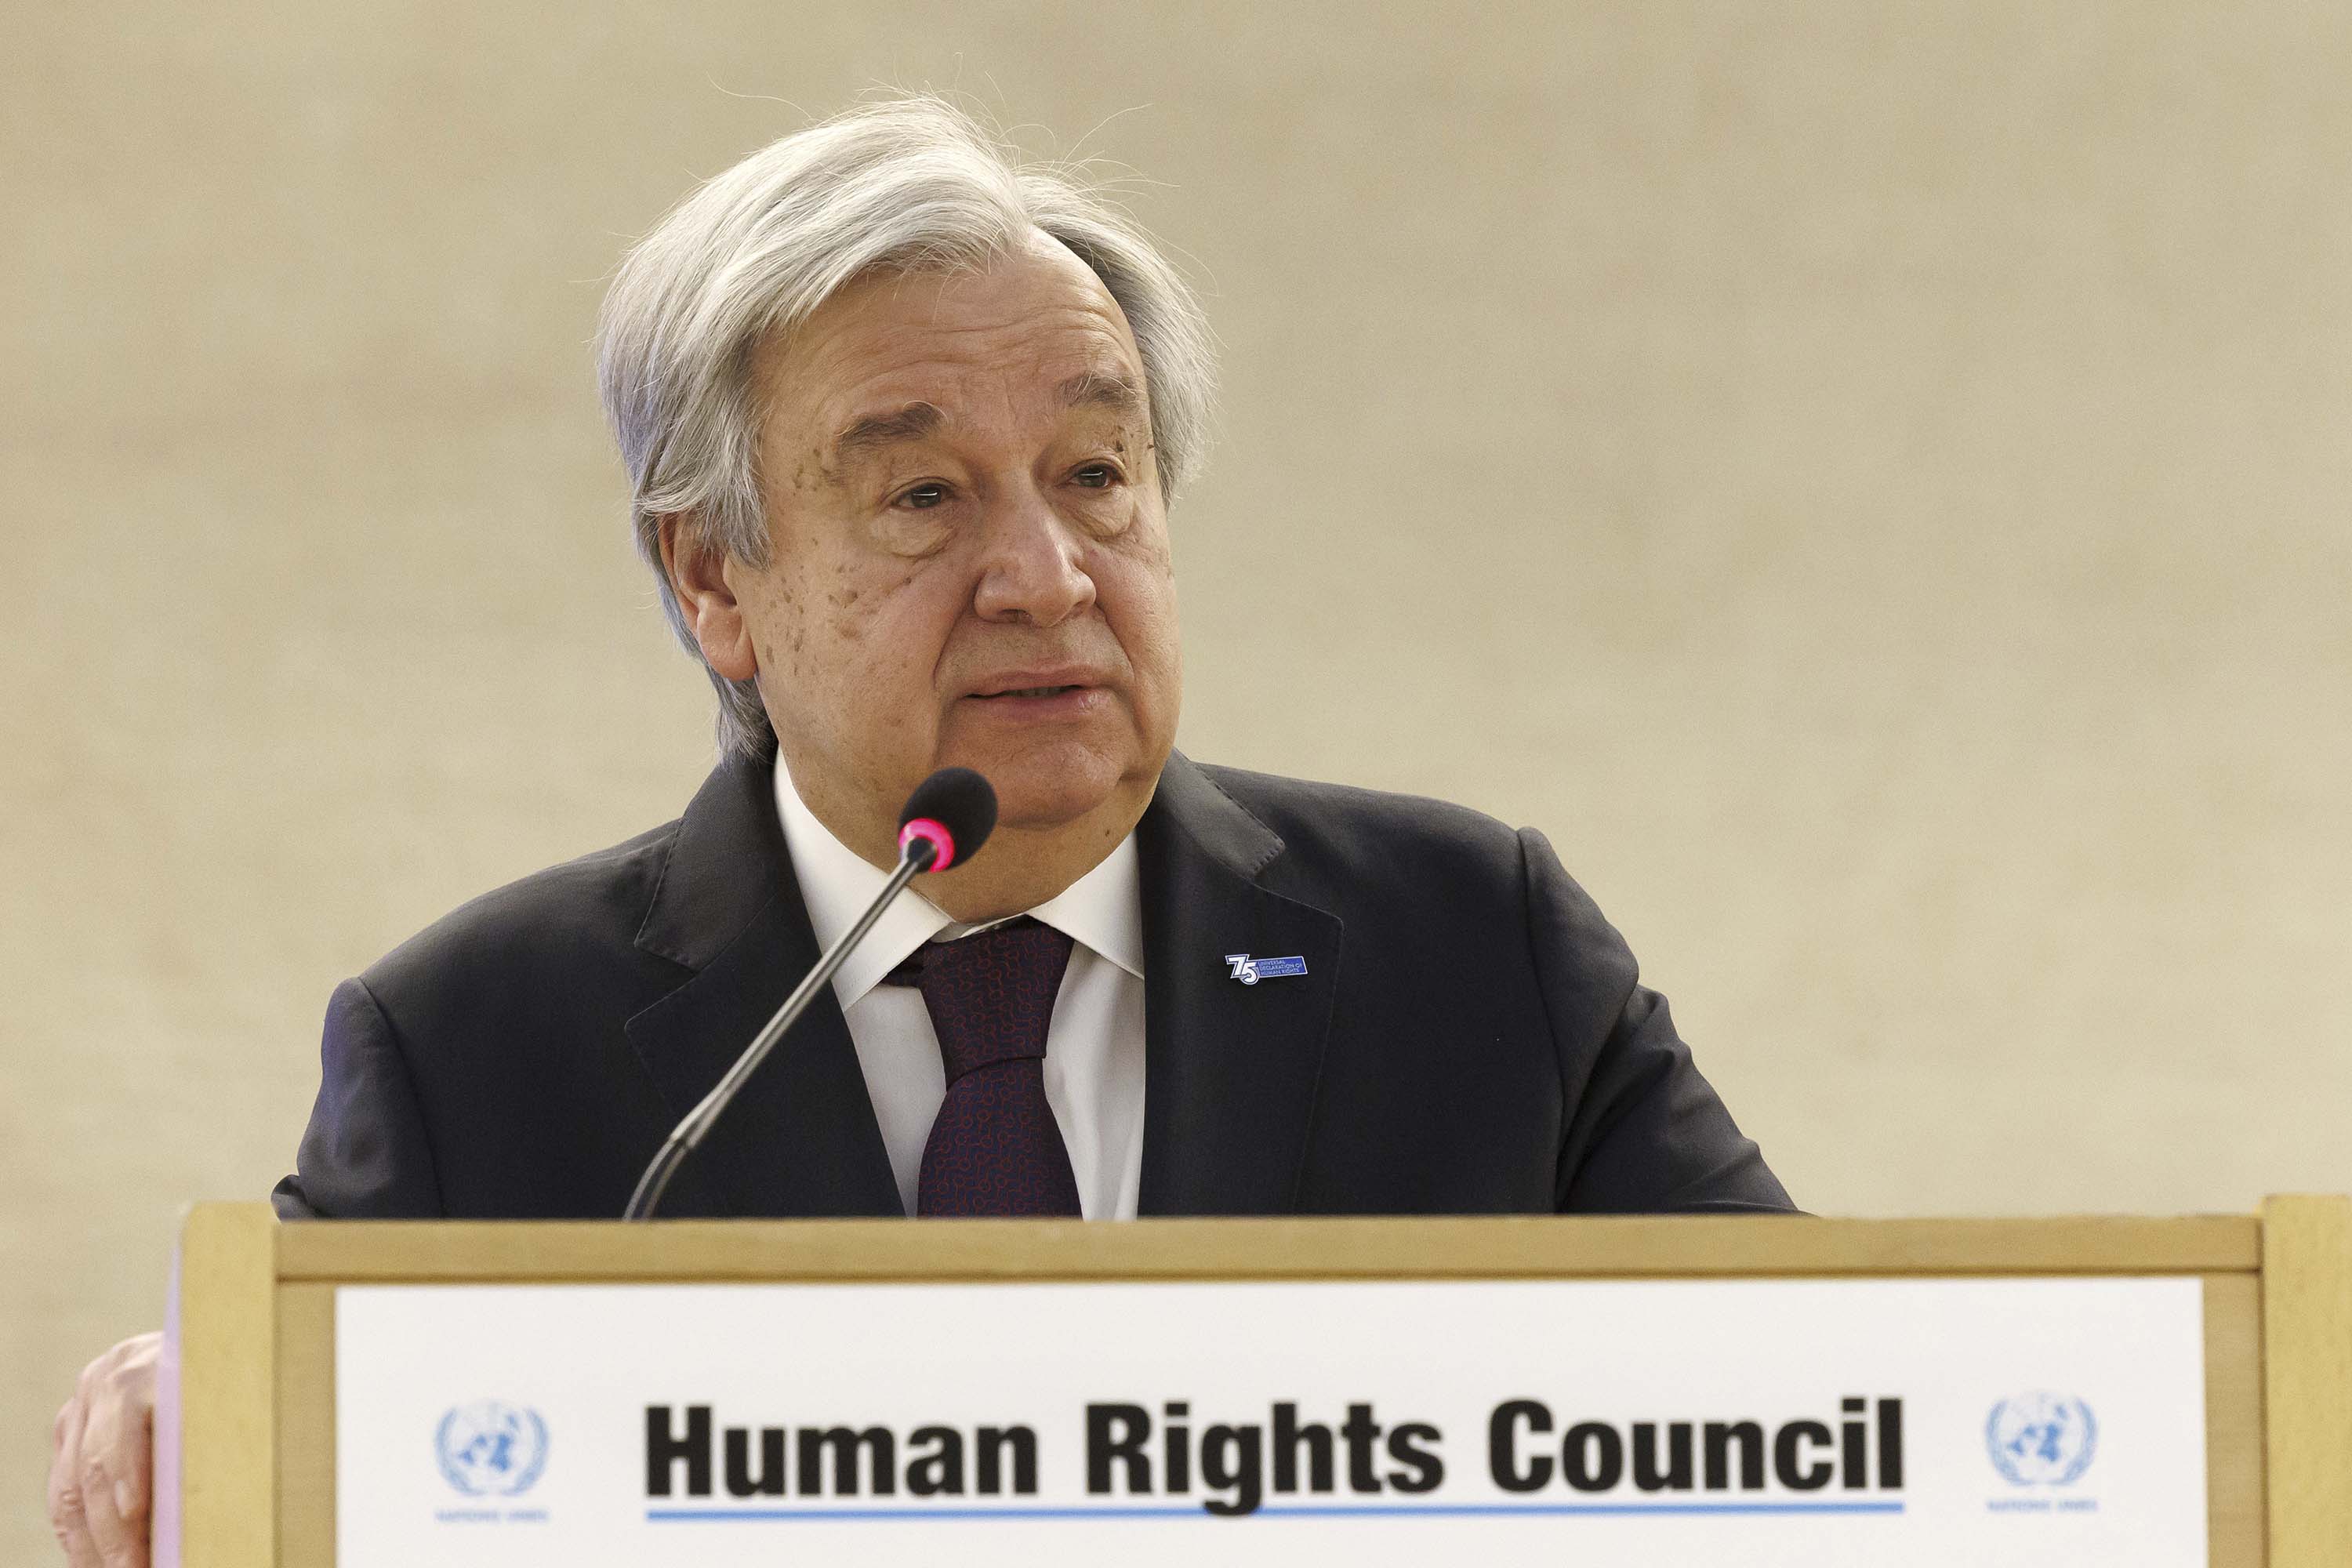 United Nations Secretary-General António Guterres speaks during a UN Human Rights Council meeting in Geneva, Switzerland, on Monday, February 27.